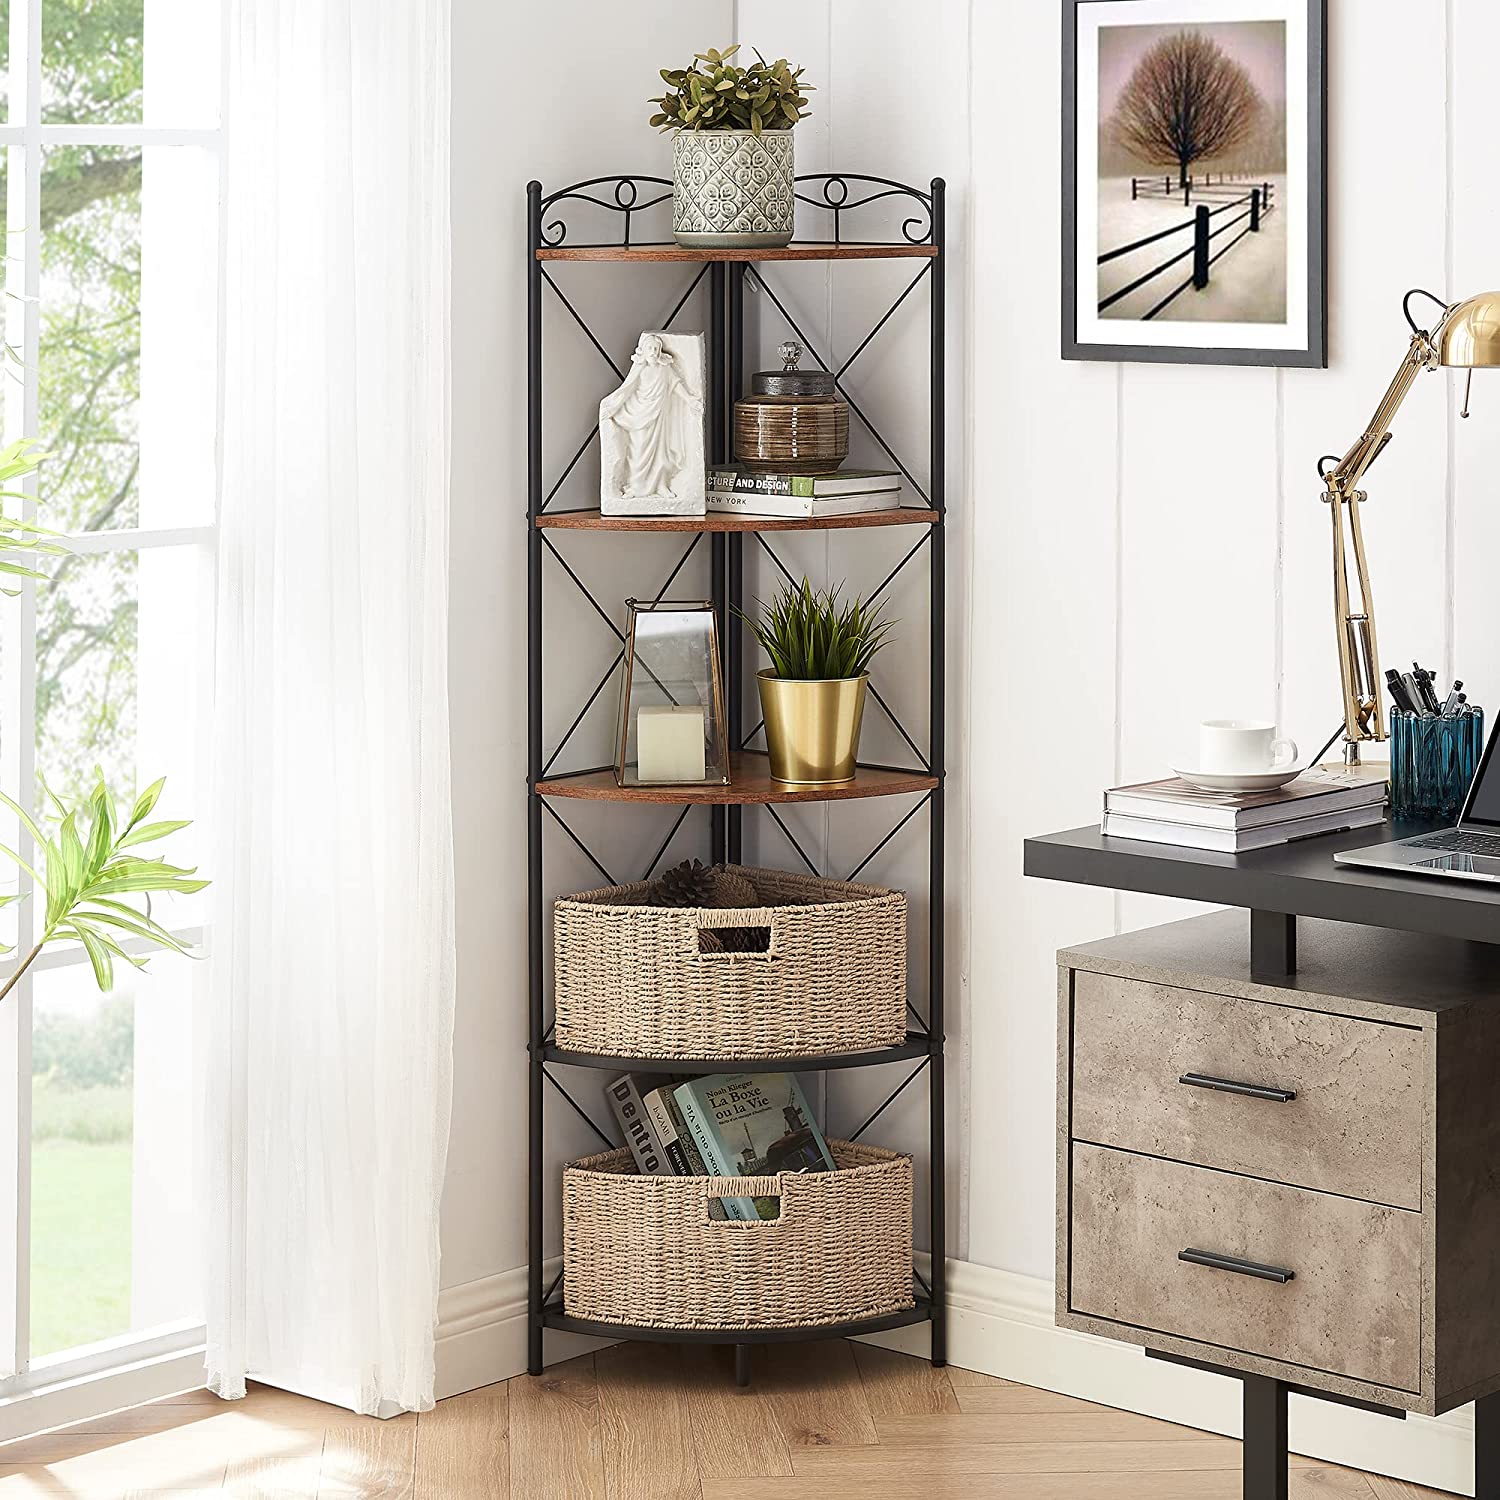 VECELO Corner Storage Cabinet with Wooden Shelves Free-Standing Organizer for Compact Space in Living Room/Bedroom/Entryway/Kitchen, 5 Tier with 2 Baskets